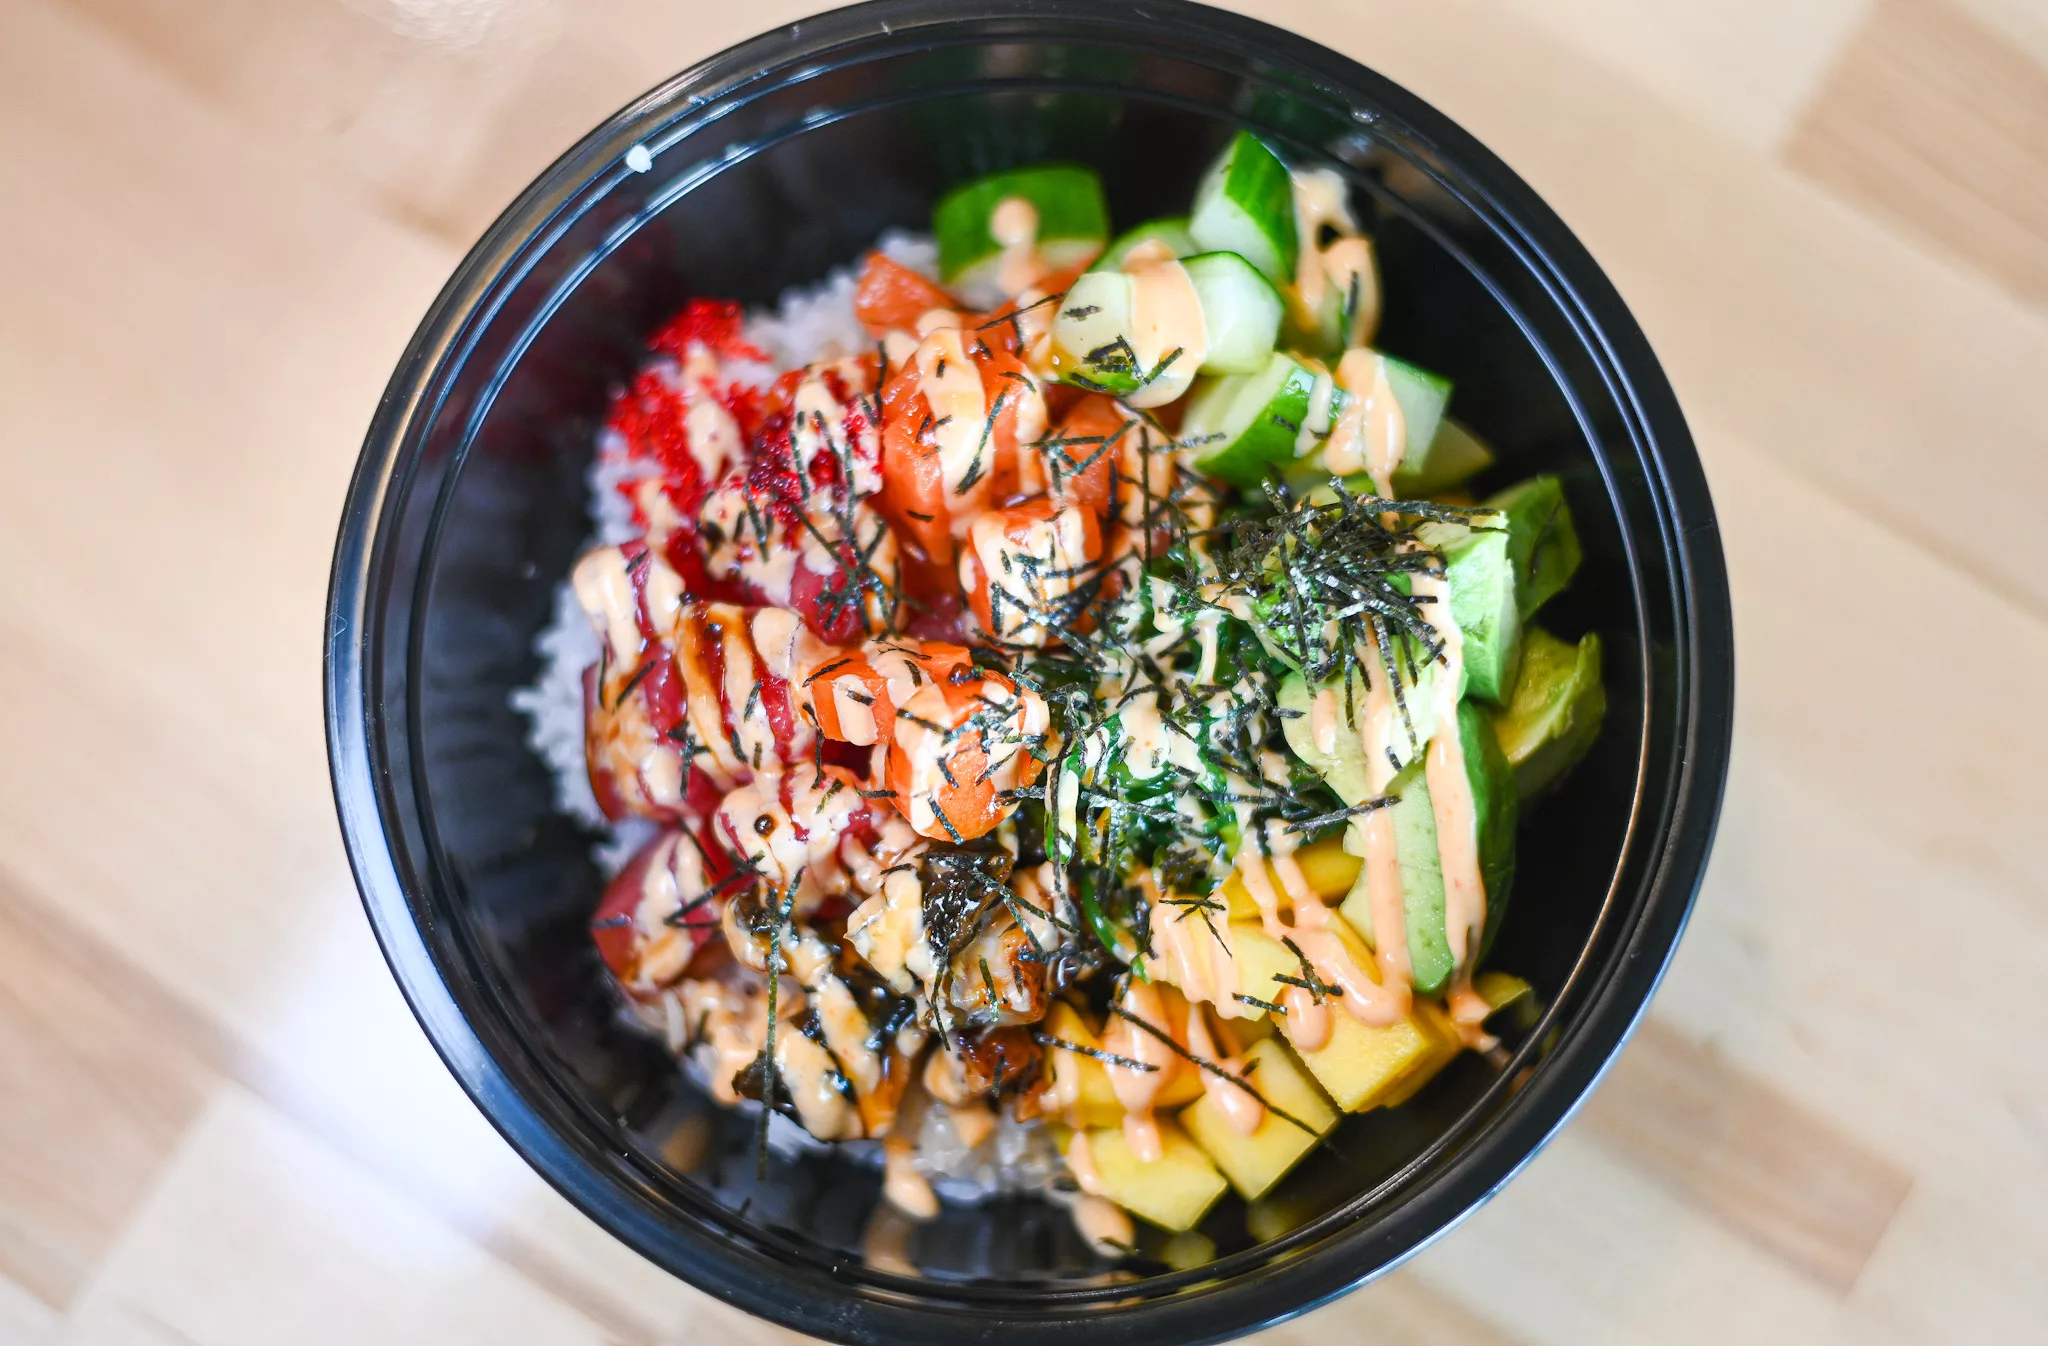 Sisters to open new Indonesian restaurant Bento & Bowl next week in  Rockford